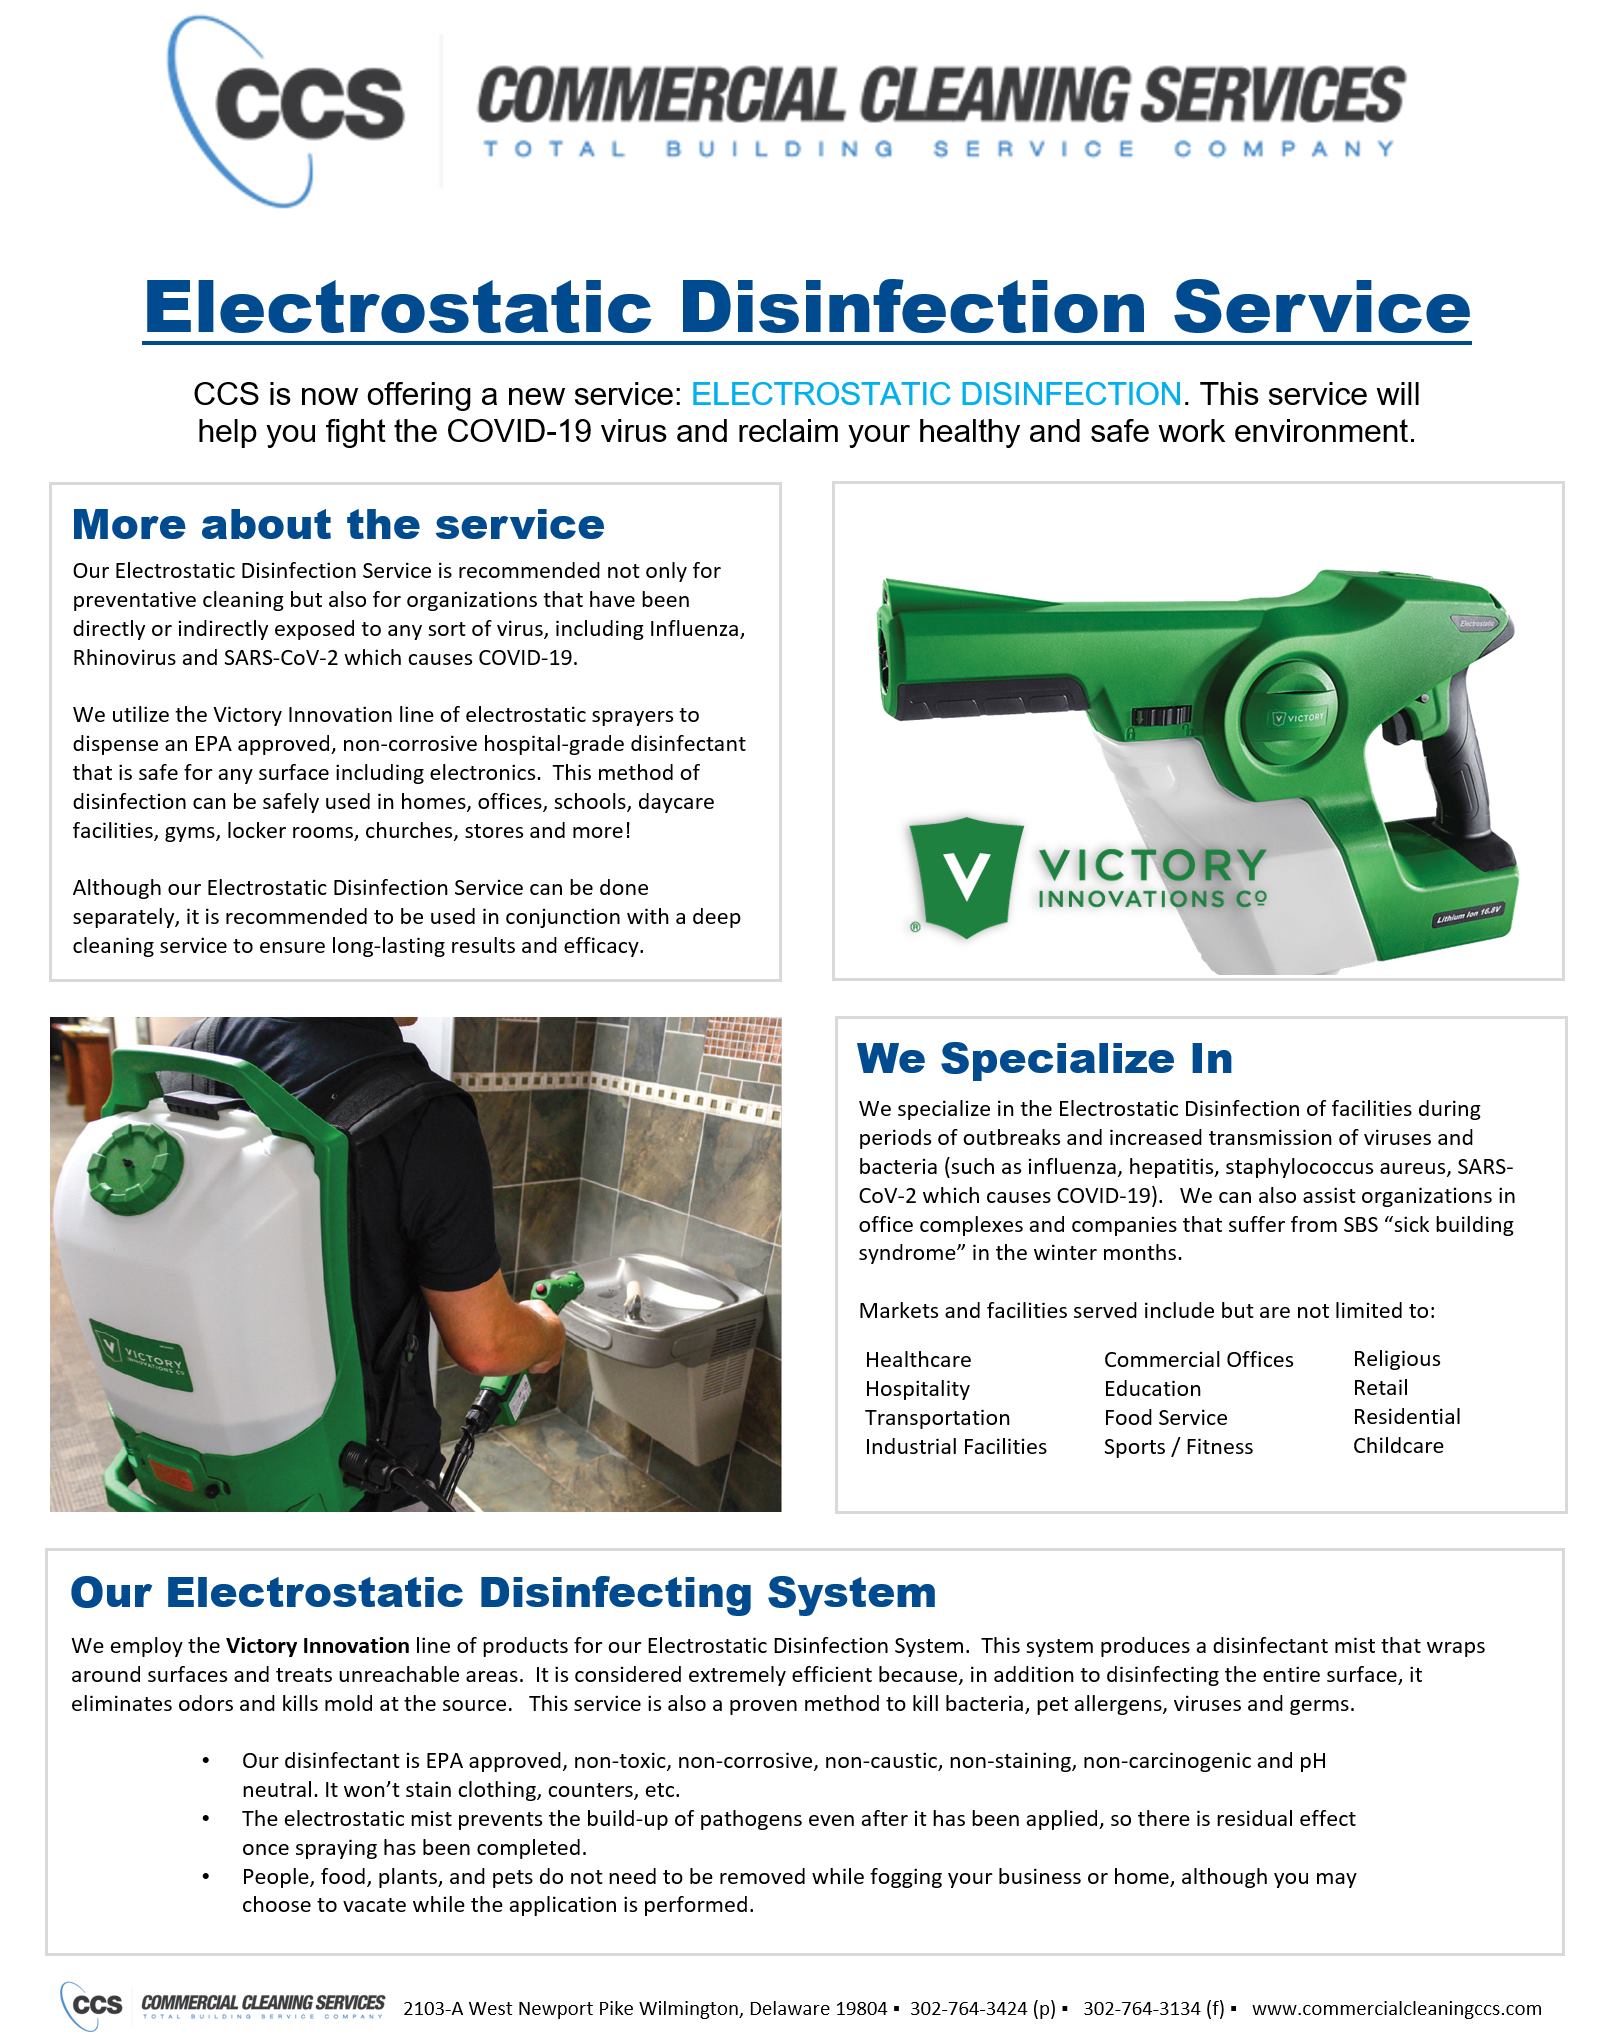 Electrostatic Disinfection Service